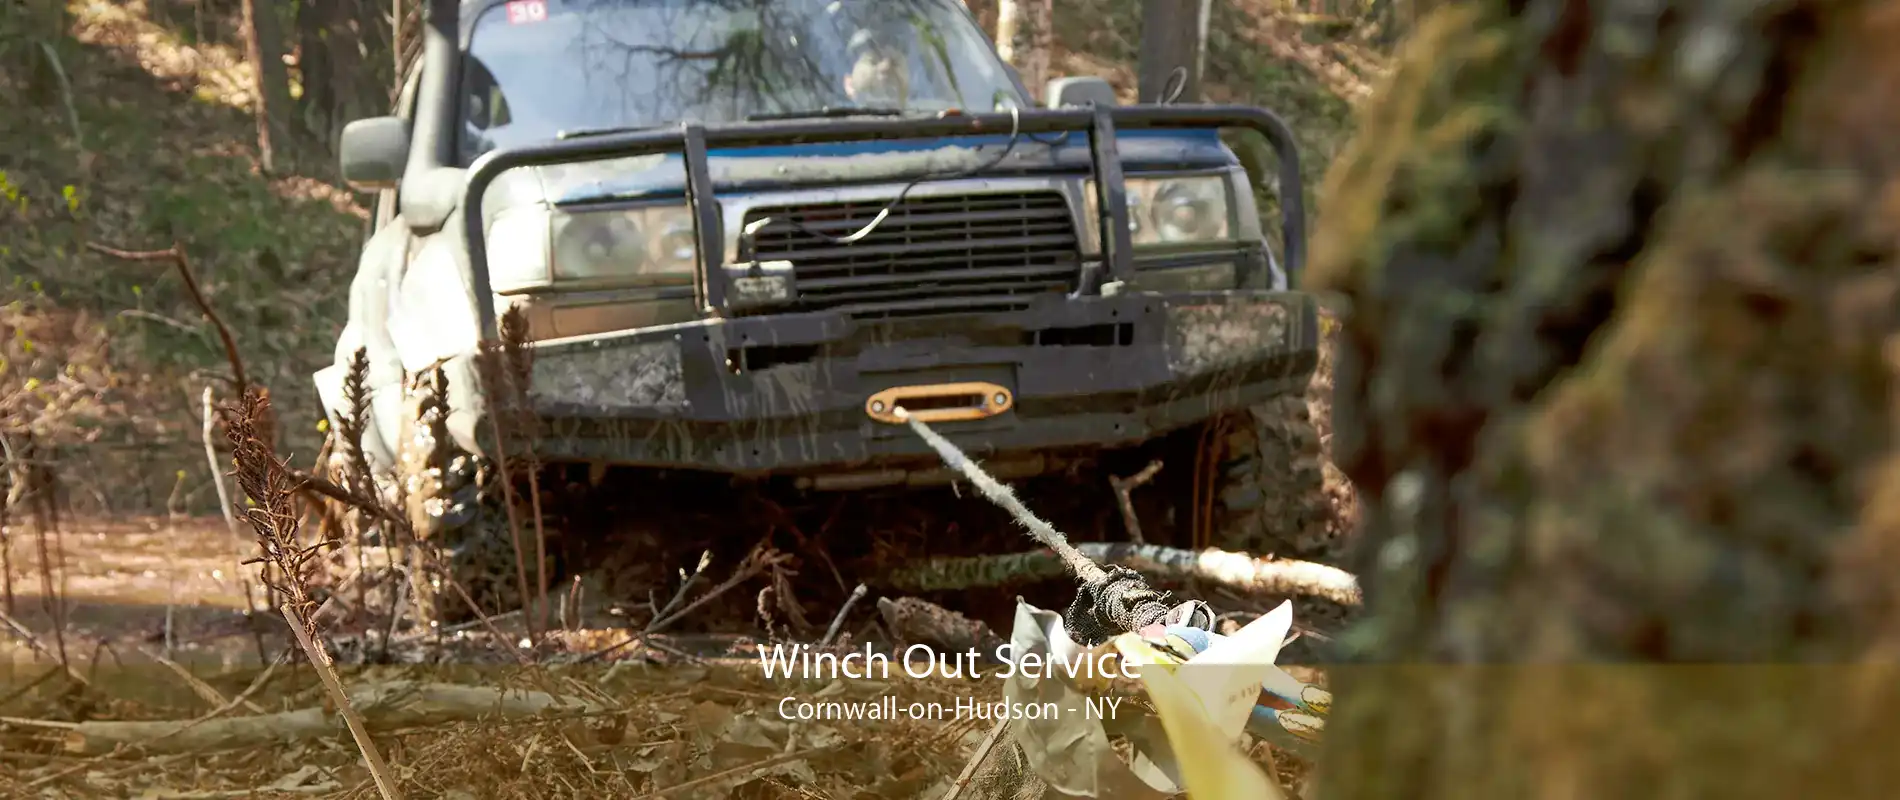 Winch Out Service Cornwall-on-Hudson - NY